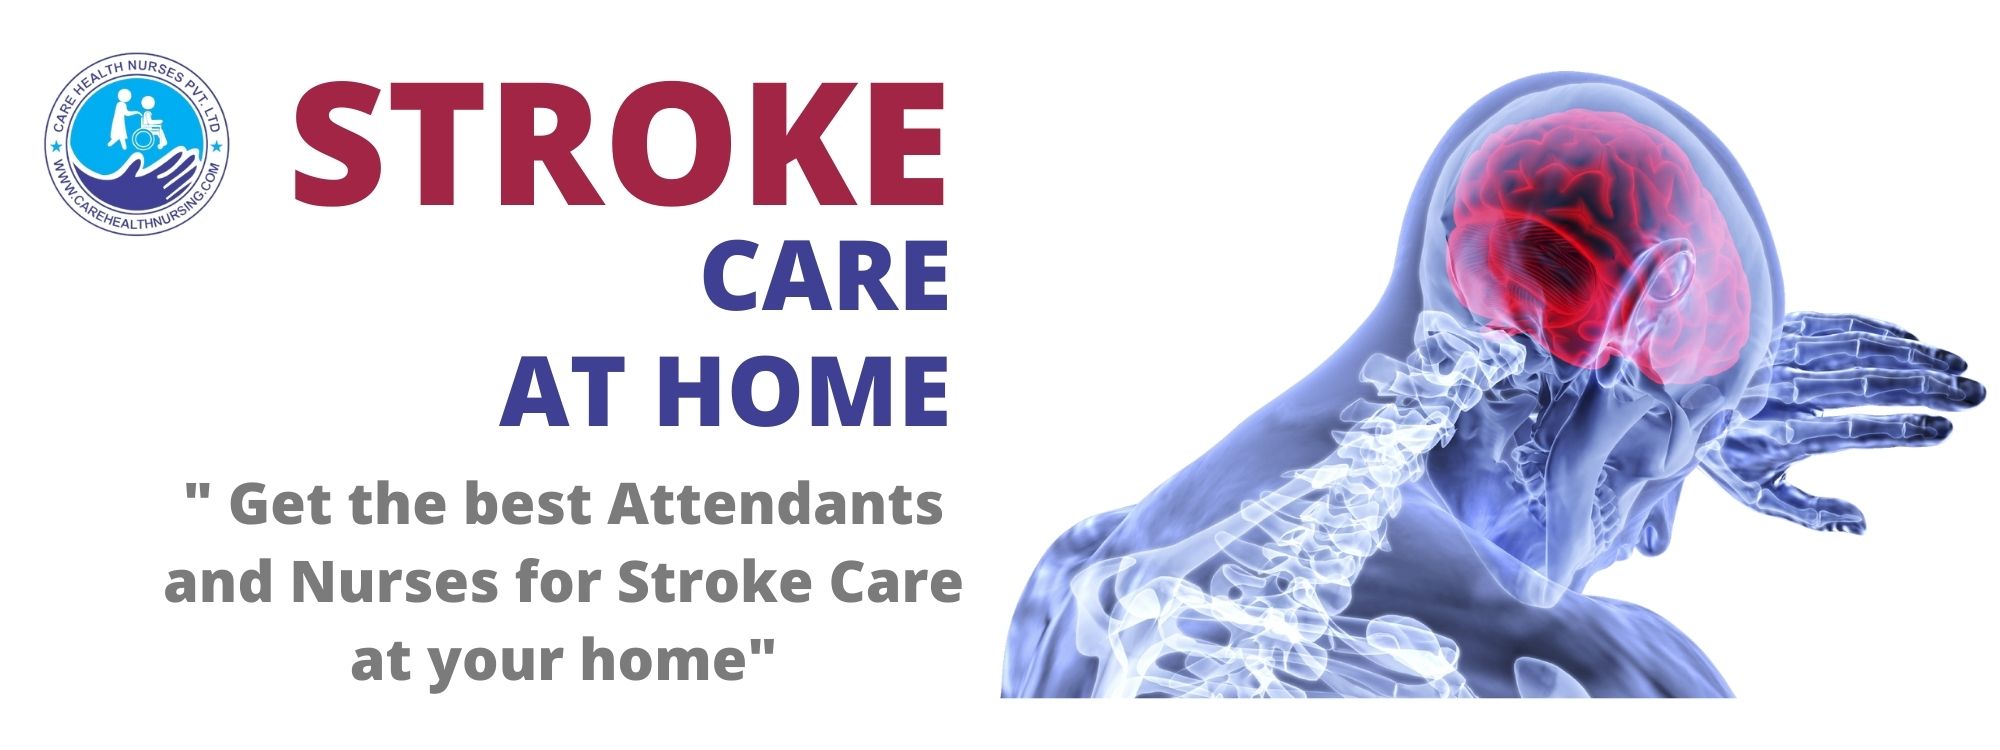 Stroke care at home